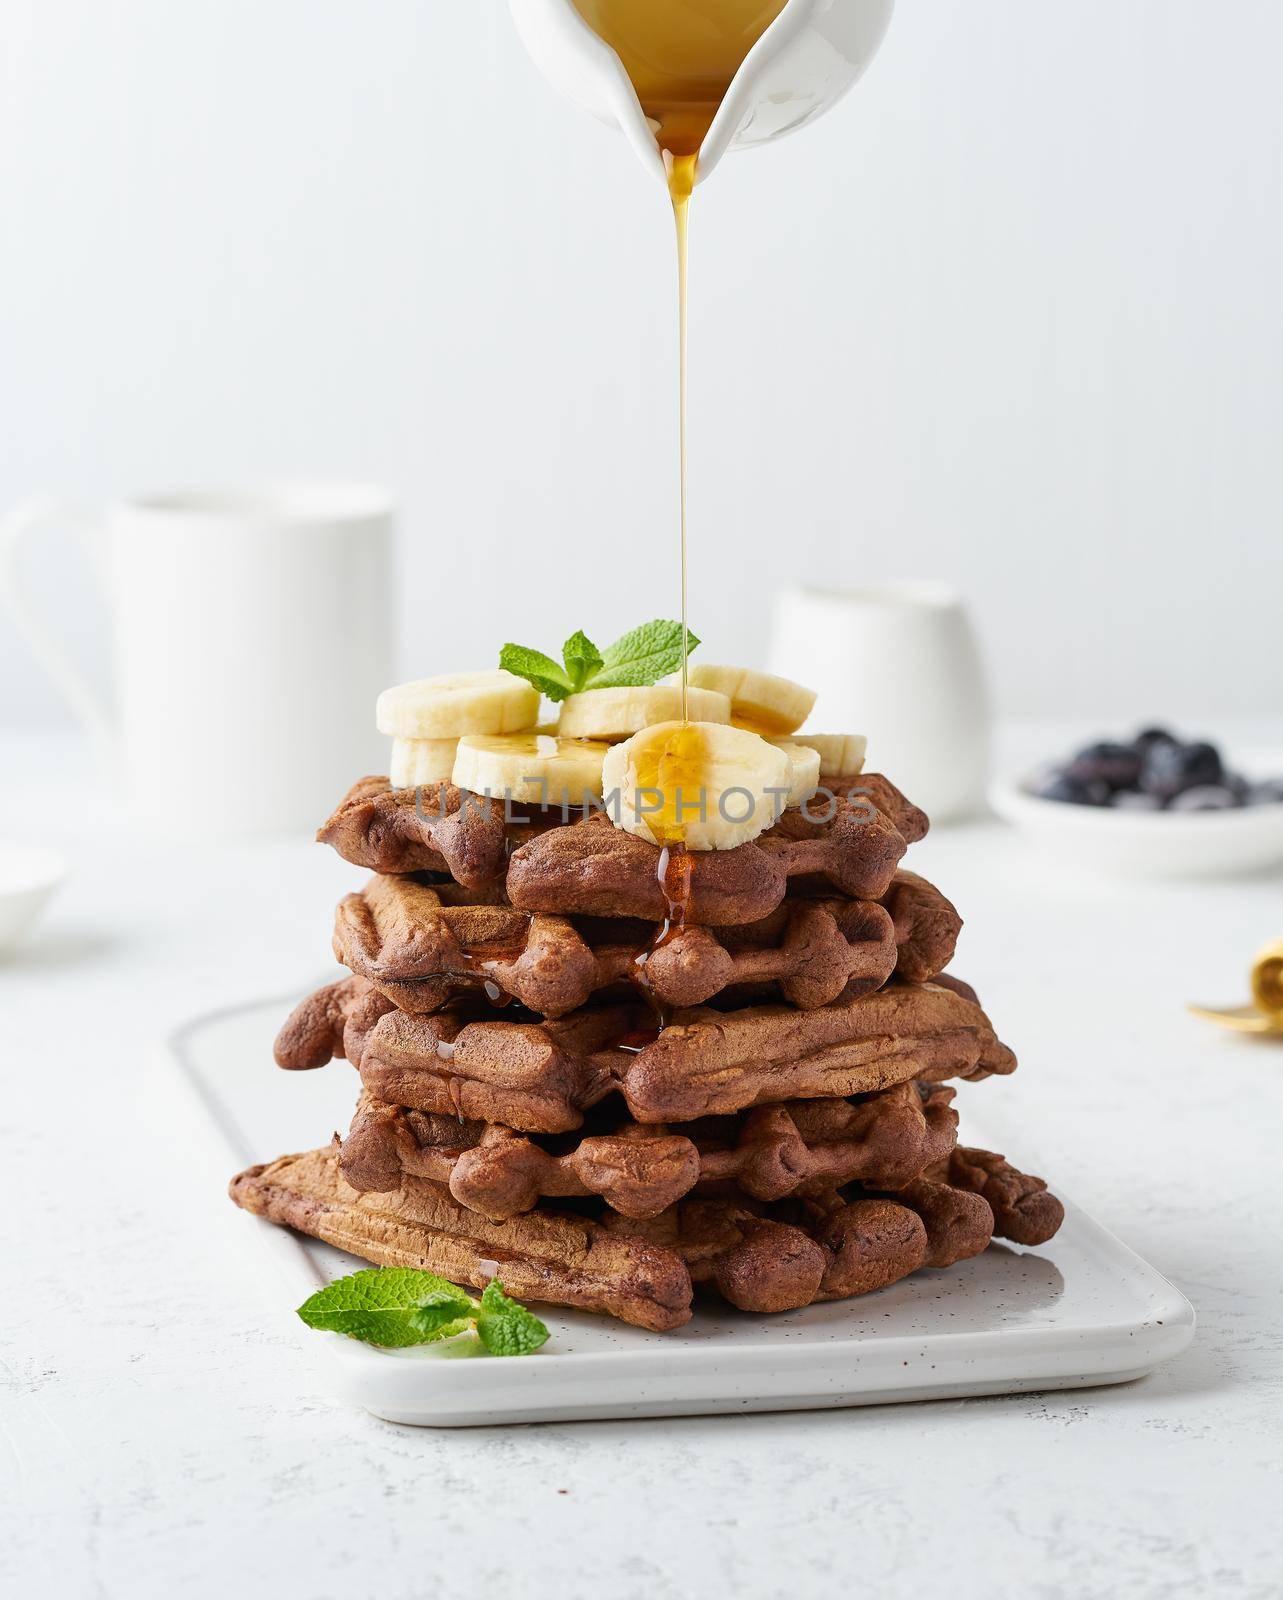 Chocolate banana waffles with maple syrup on white table, side view, vertical. Sweet brunch, maple syrup flow in milk jug, a creamer.